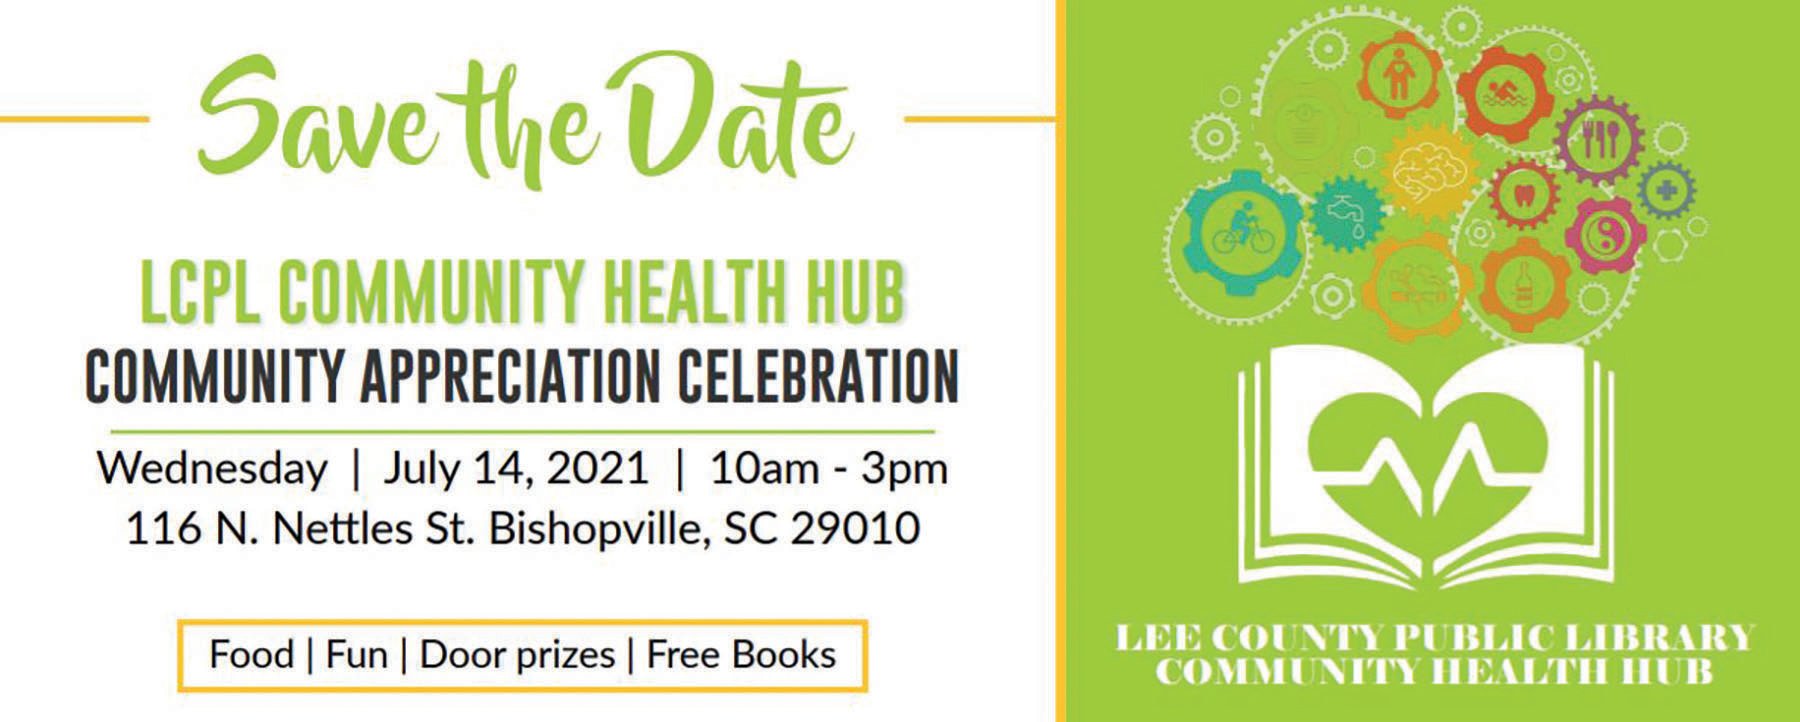 Lee County Public Library celebrates community health hub with appreciation  day | The Sumter Item